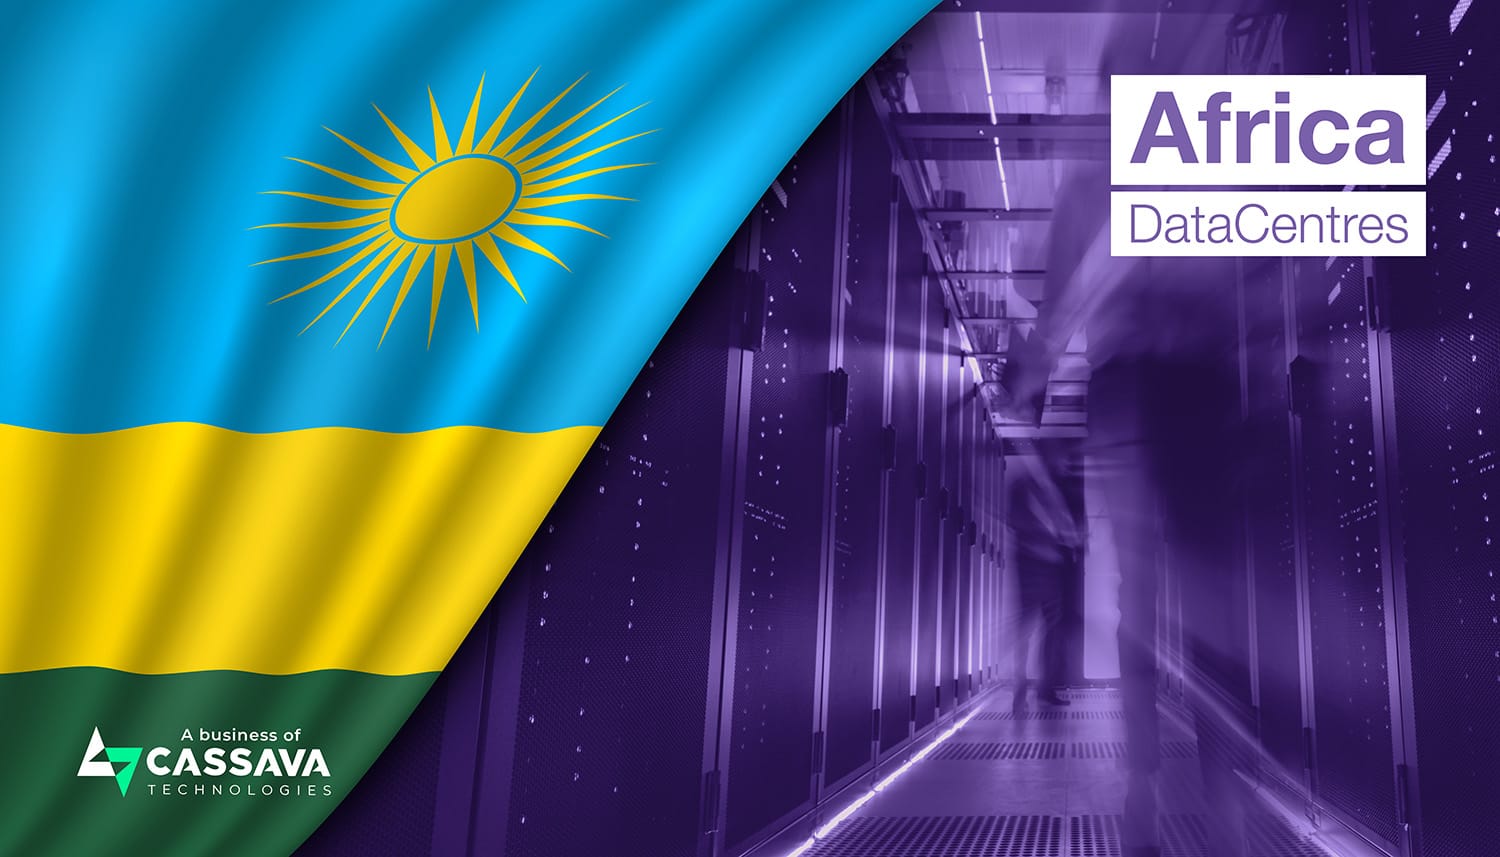 Africa Data Centres to build its first data centre in Kigali, Rwanda